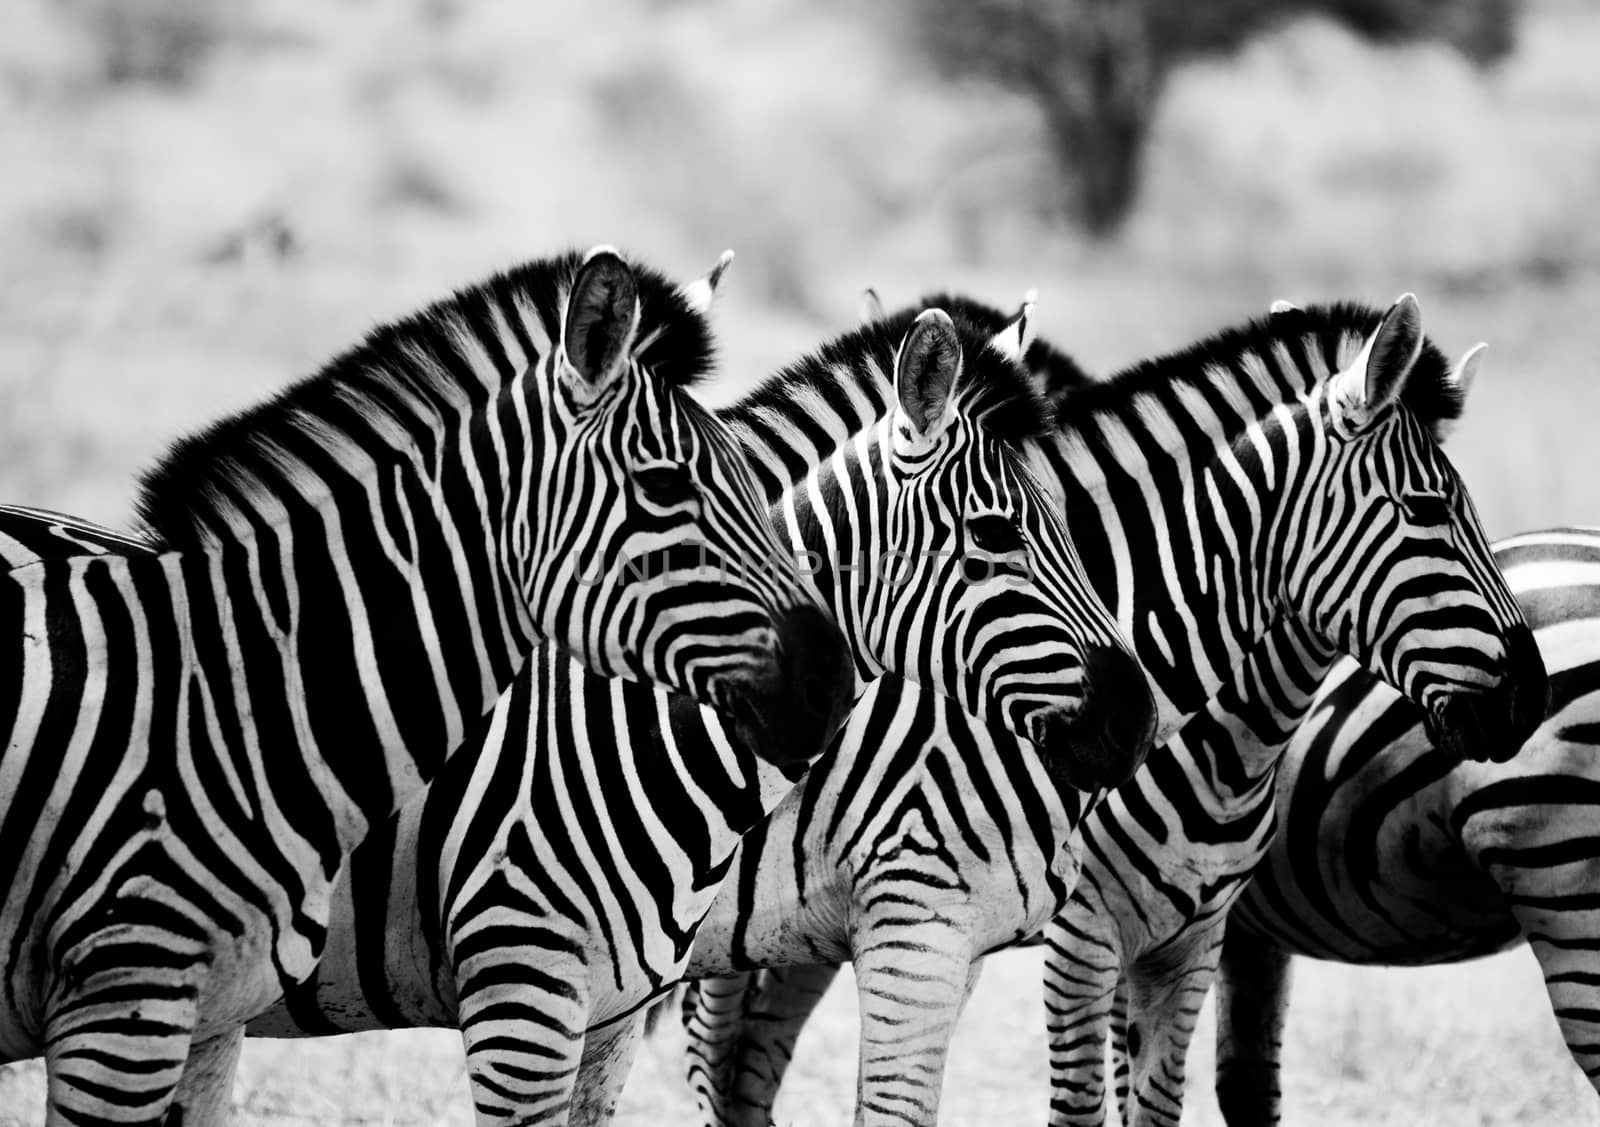 Starring Zebras in black and white in the Kruger National Park, South Africa. by Simoneemanphotography